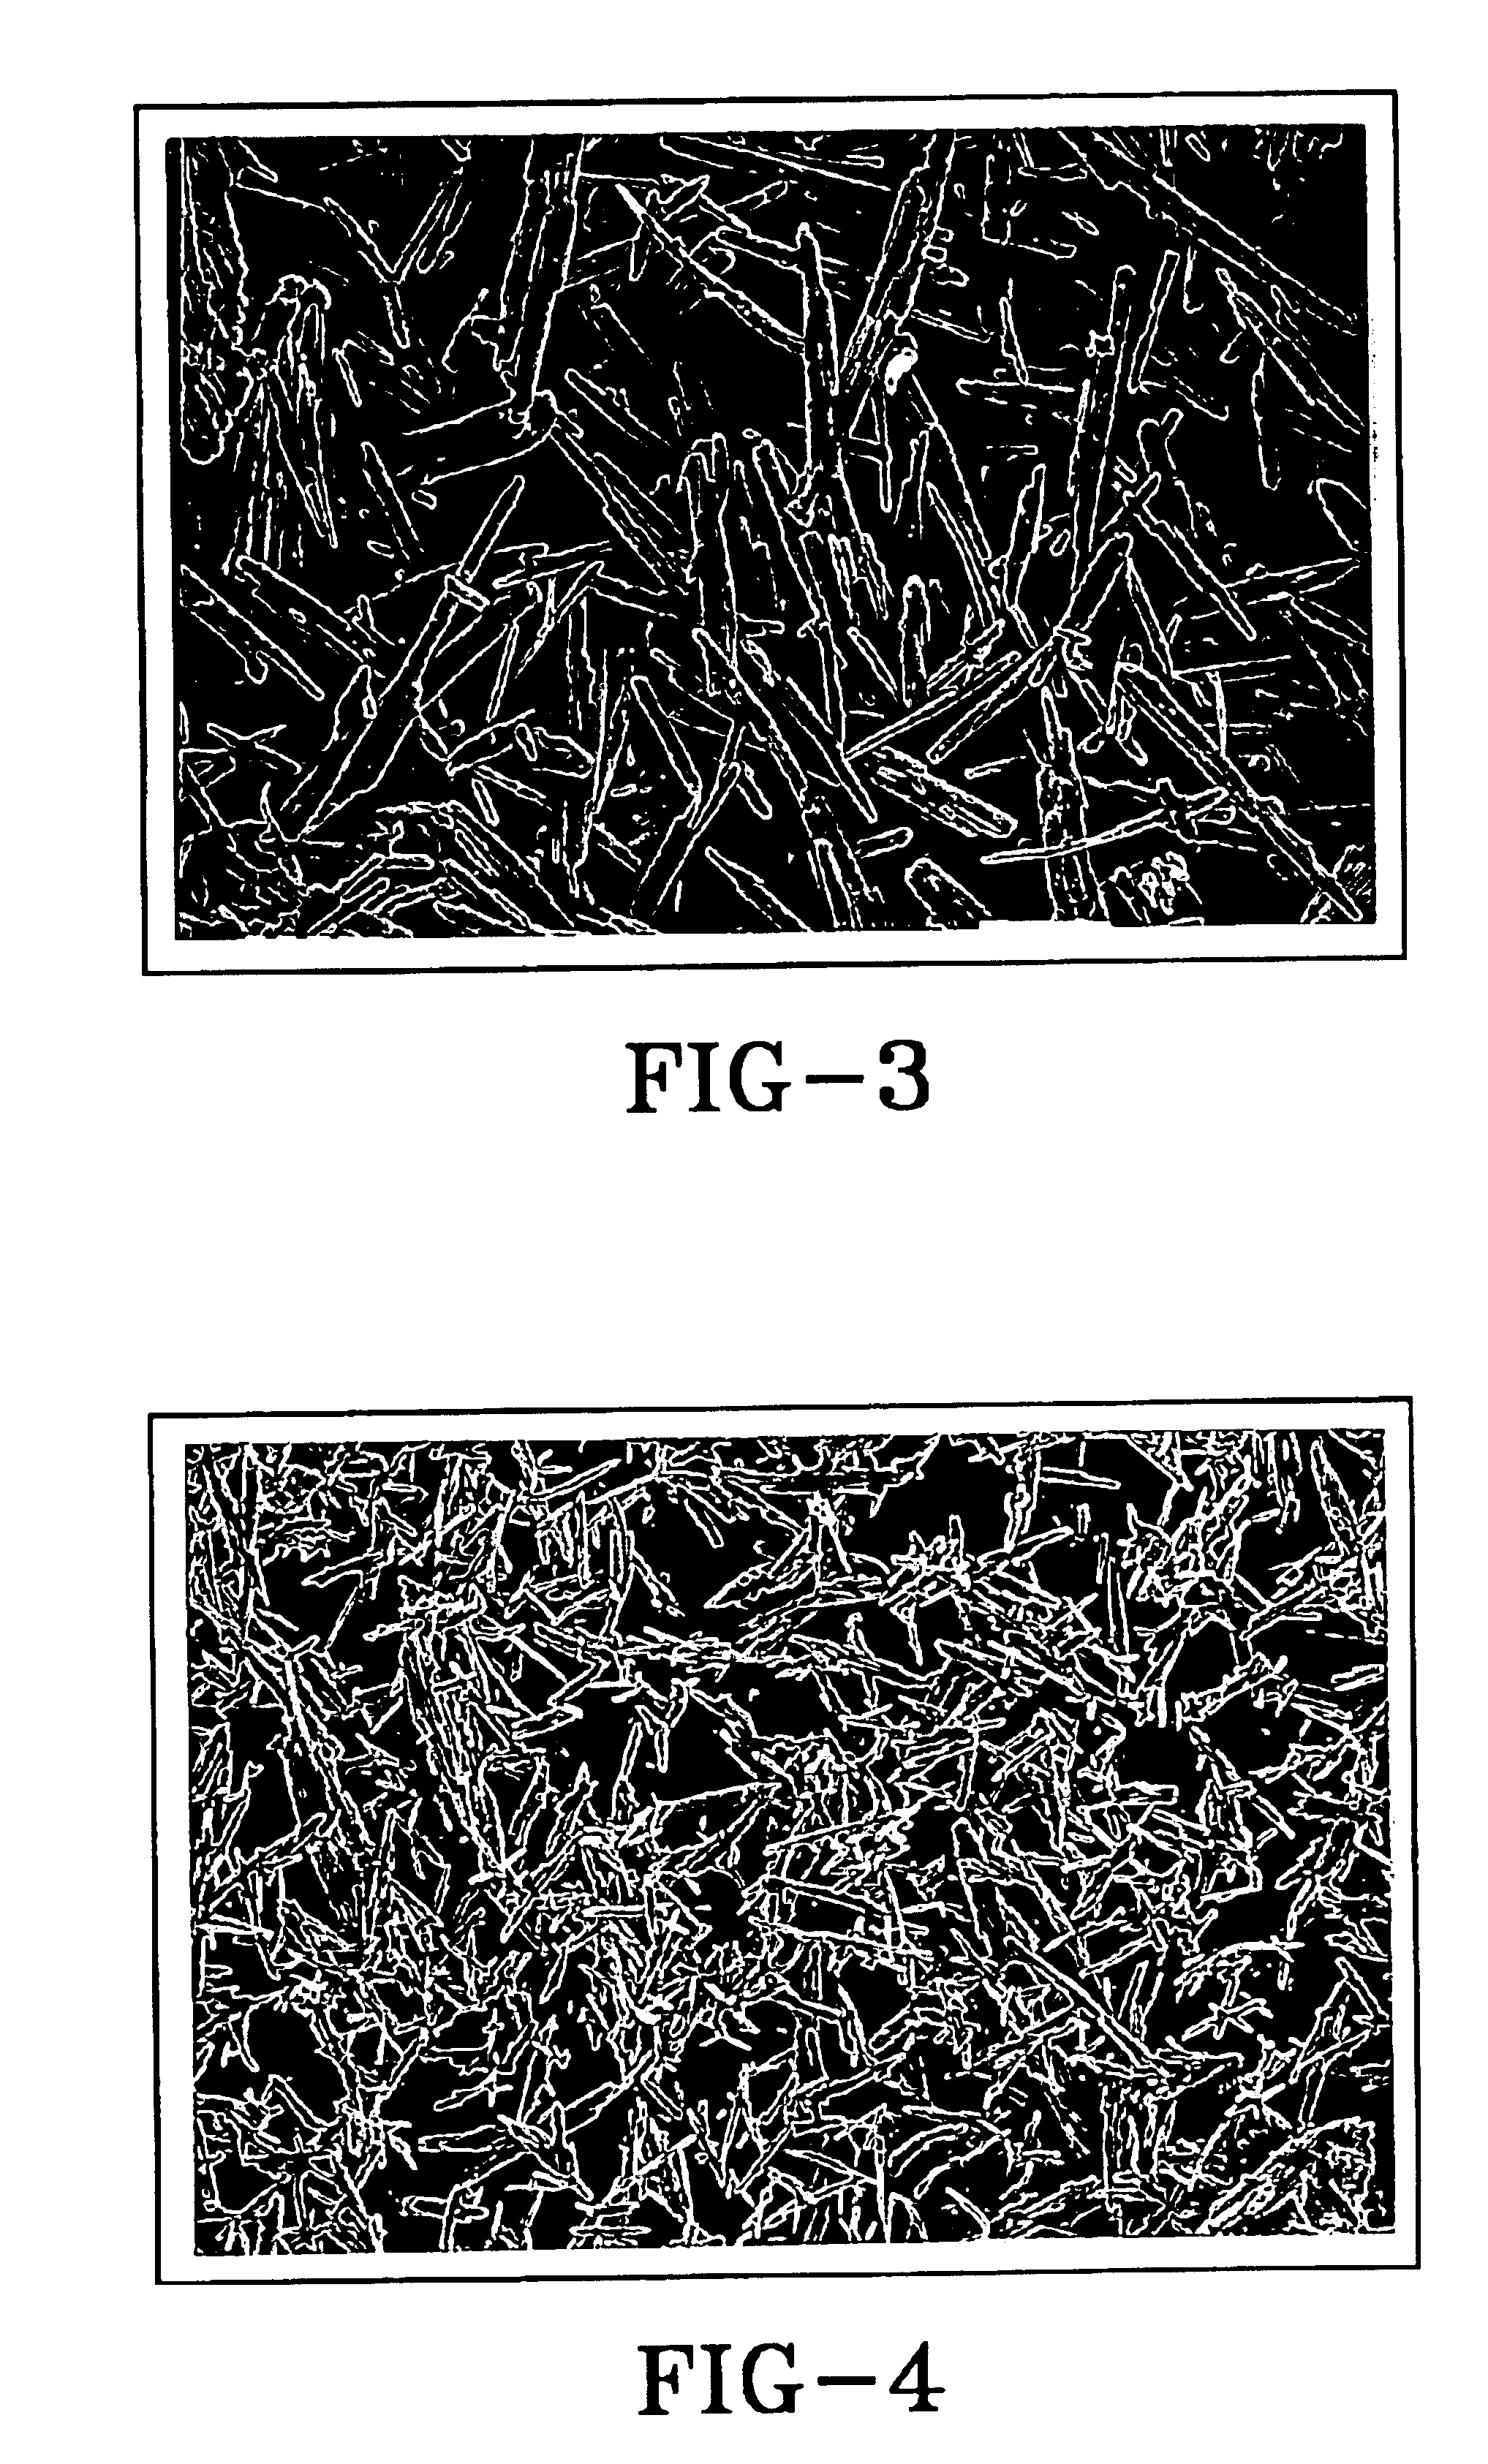 Method of stabilizing the density of gas generant pellets containing nitroguanidine